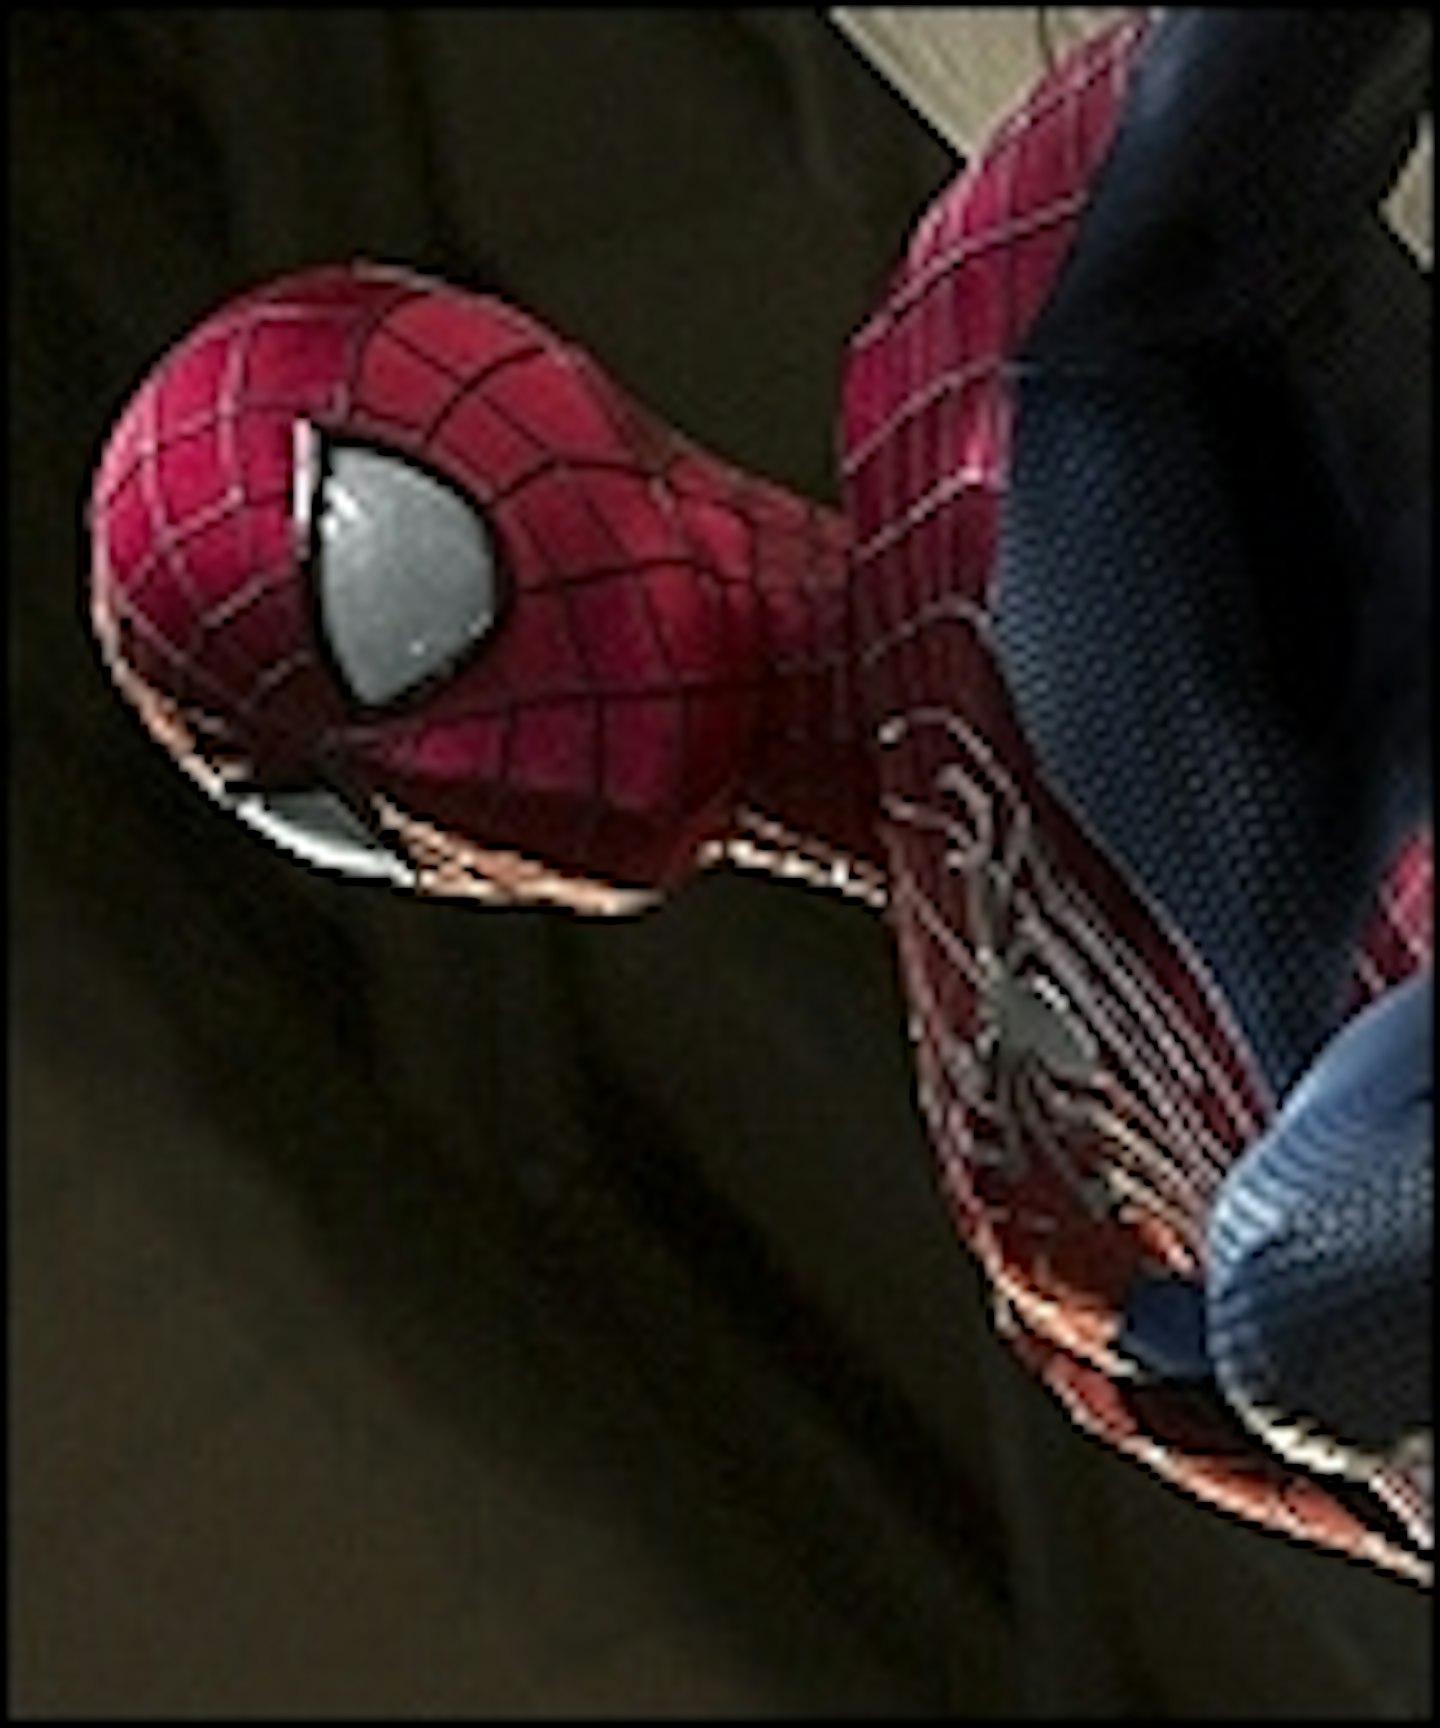 Latest Poster For The Amazing Spider-Man 2